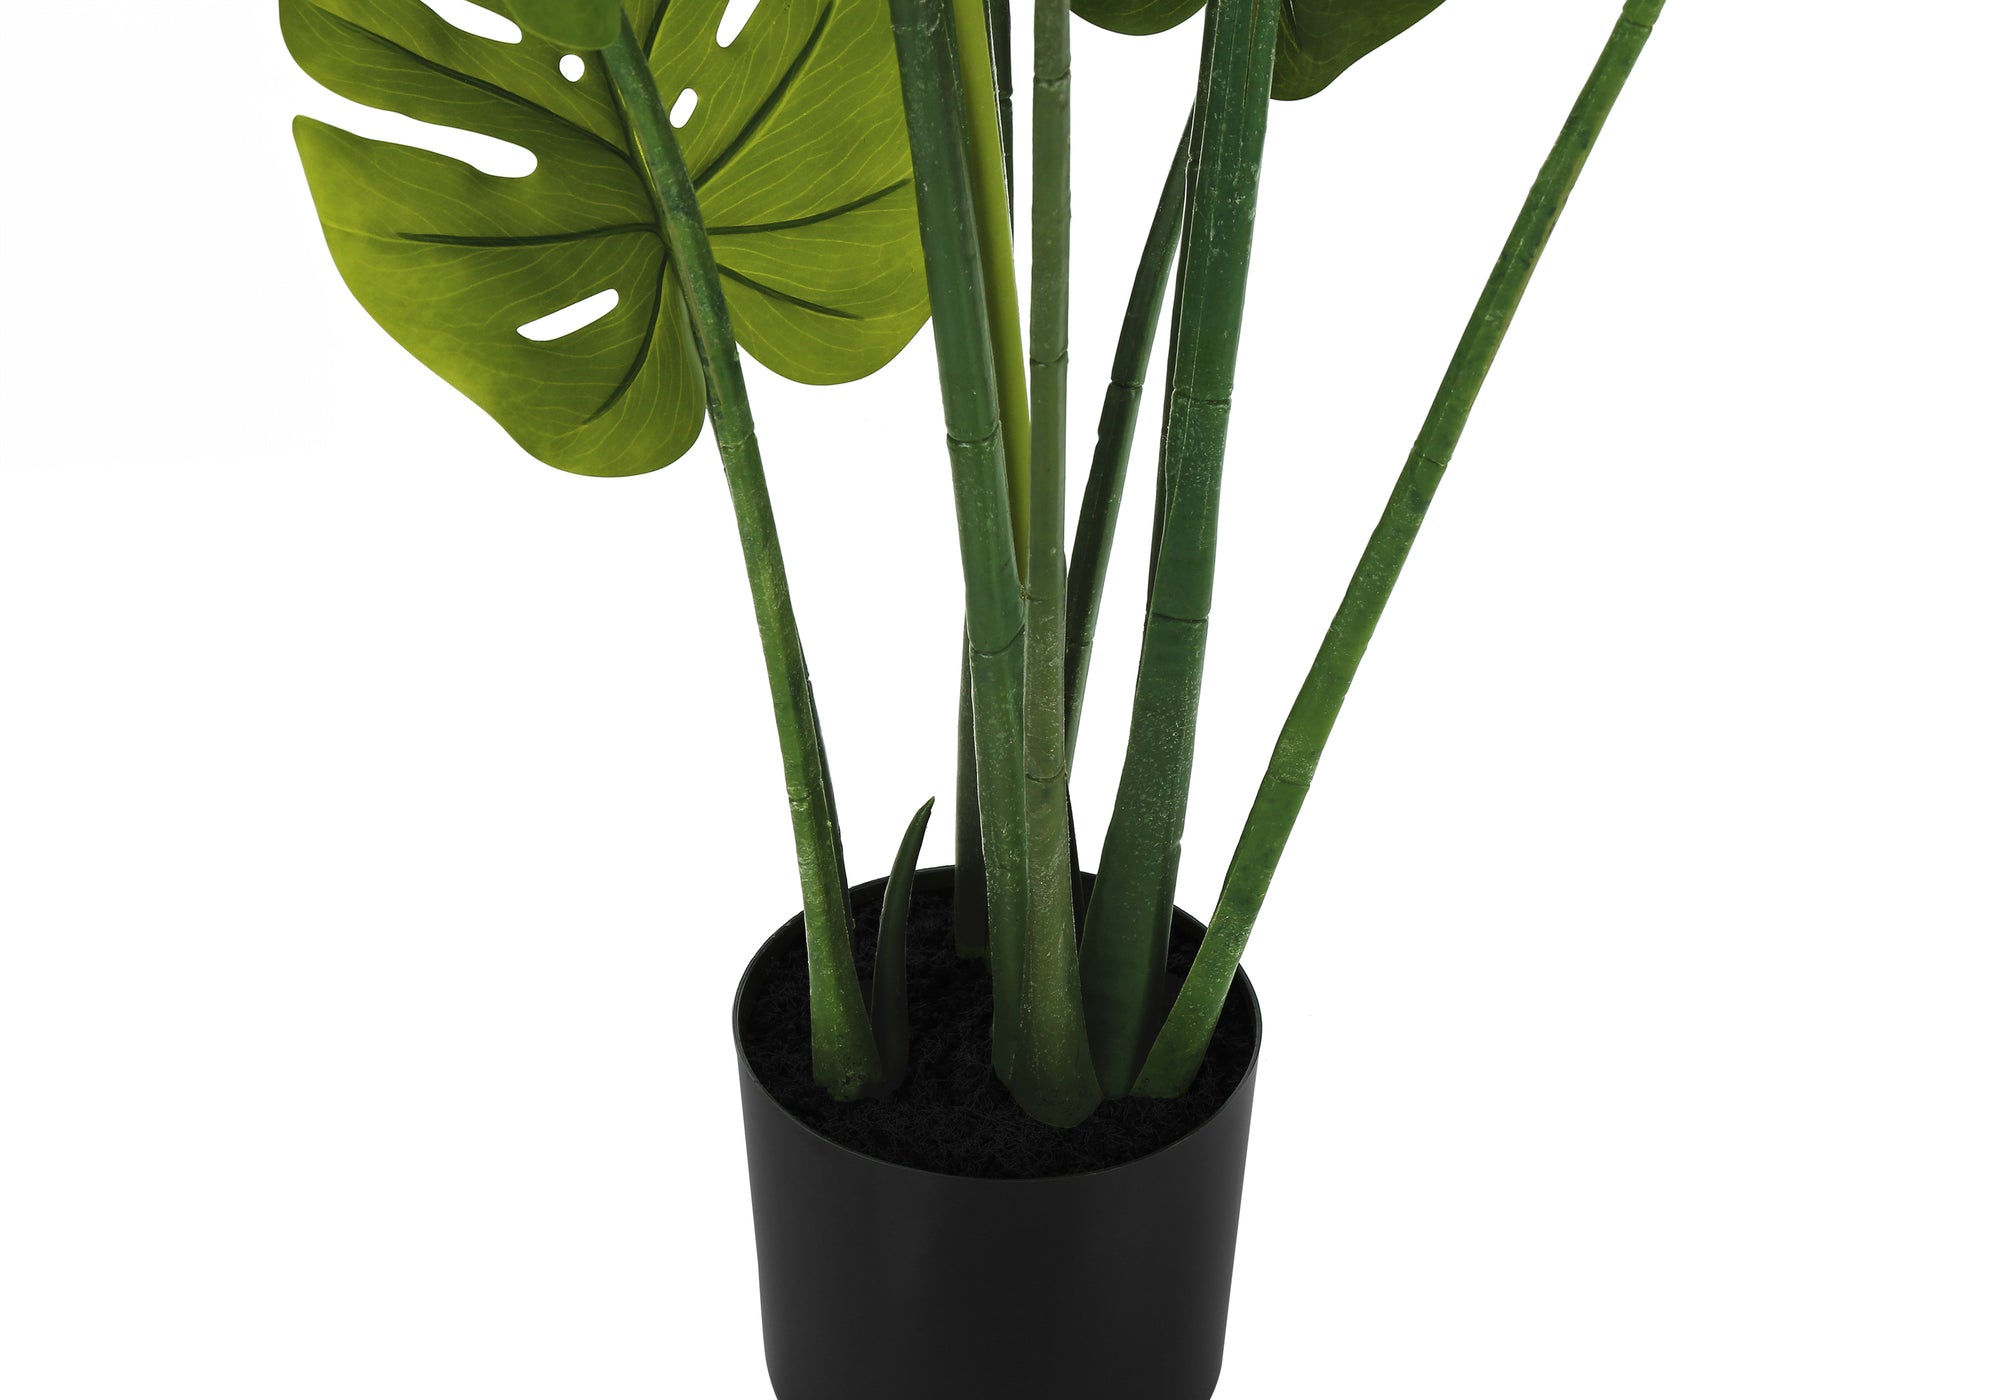 ARTIFICIAL PLANT - 45"H / INDOOR MONSTERA IN A 6" POT